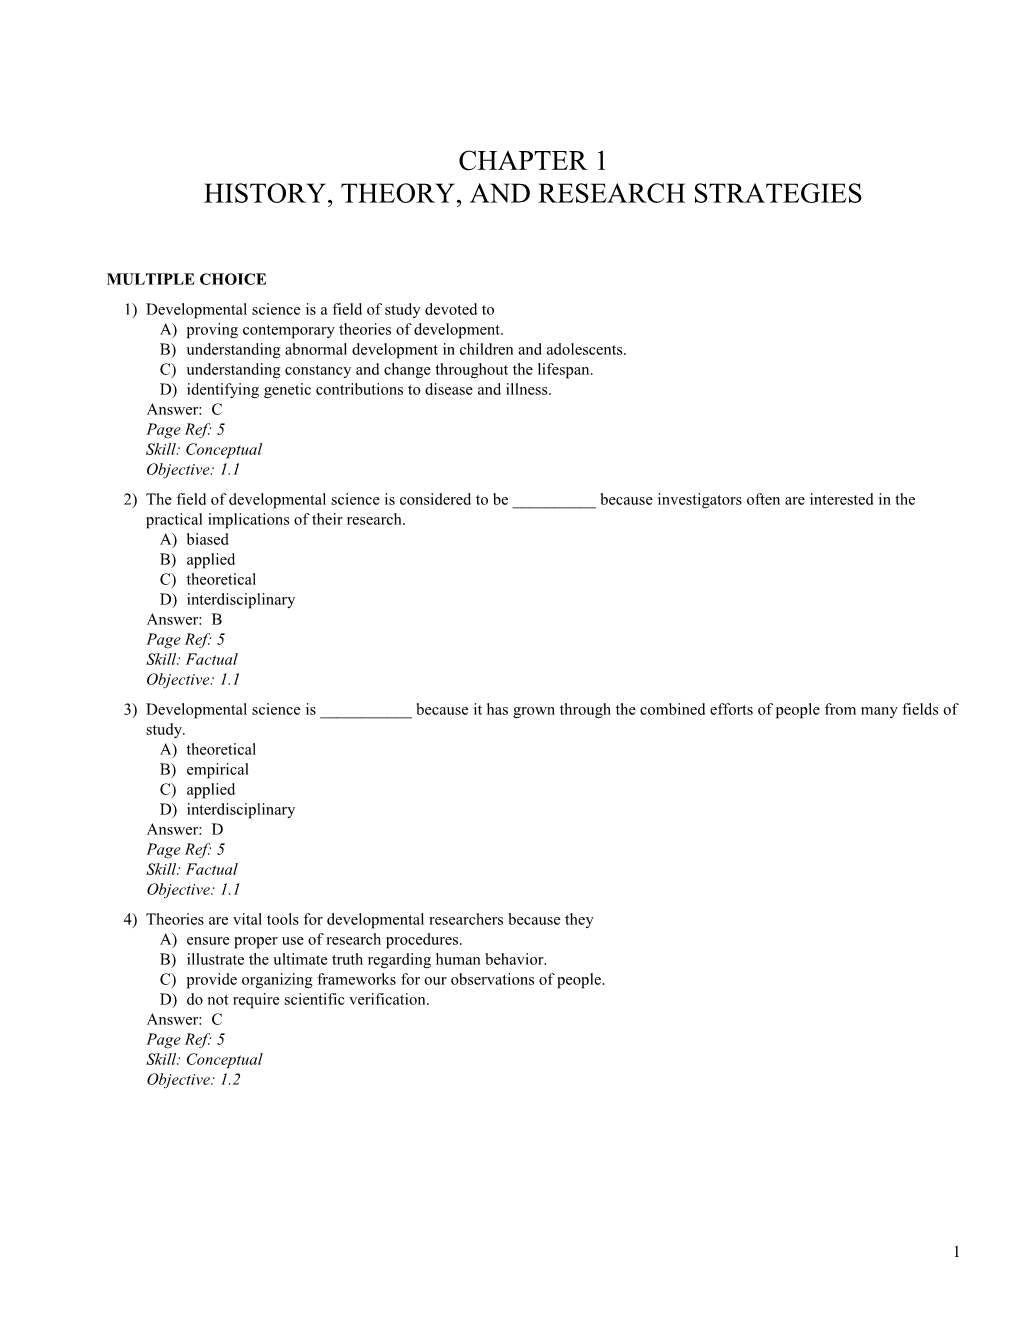 Chapter 1 History, Theory, and Research Strategies s1